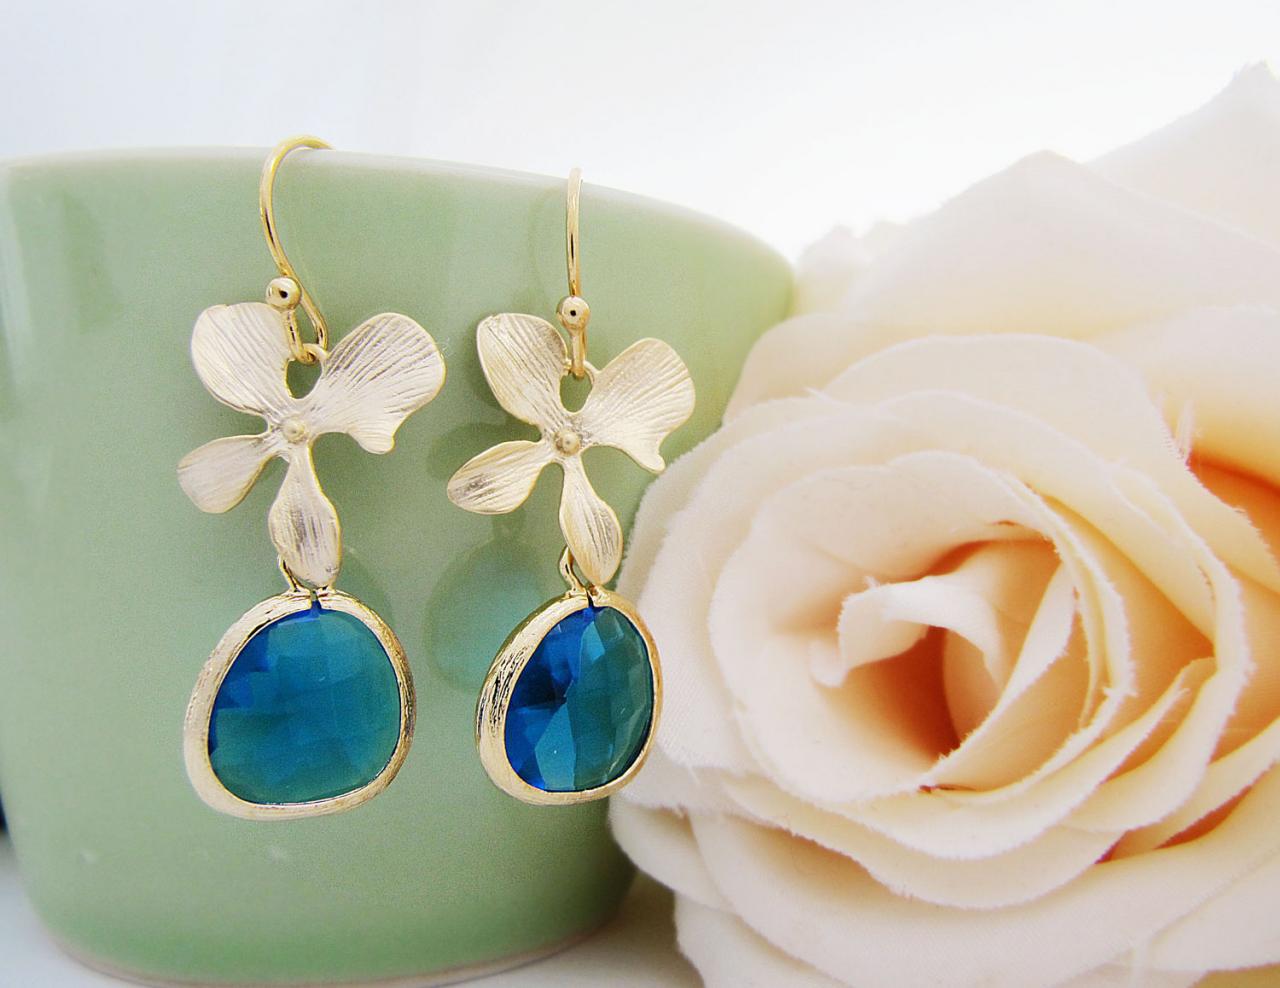 Matte Gold Orchid Flower And Capri Blue Glass Drop Earrings . For Her. Gift For Her. Bridesmaid Earrings